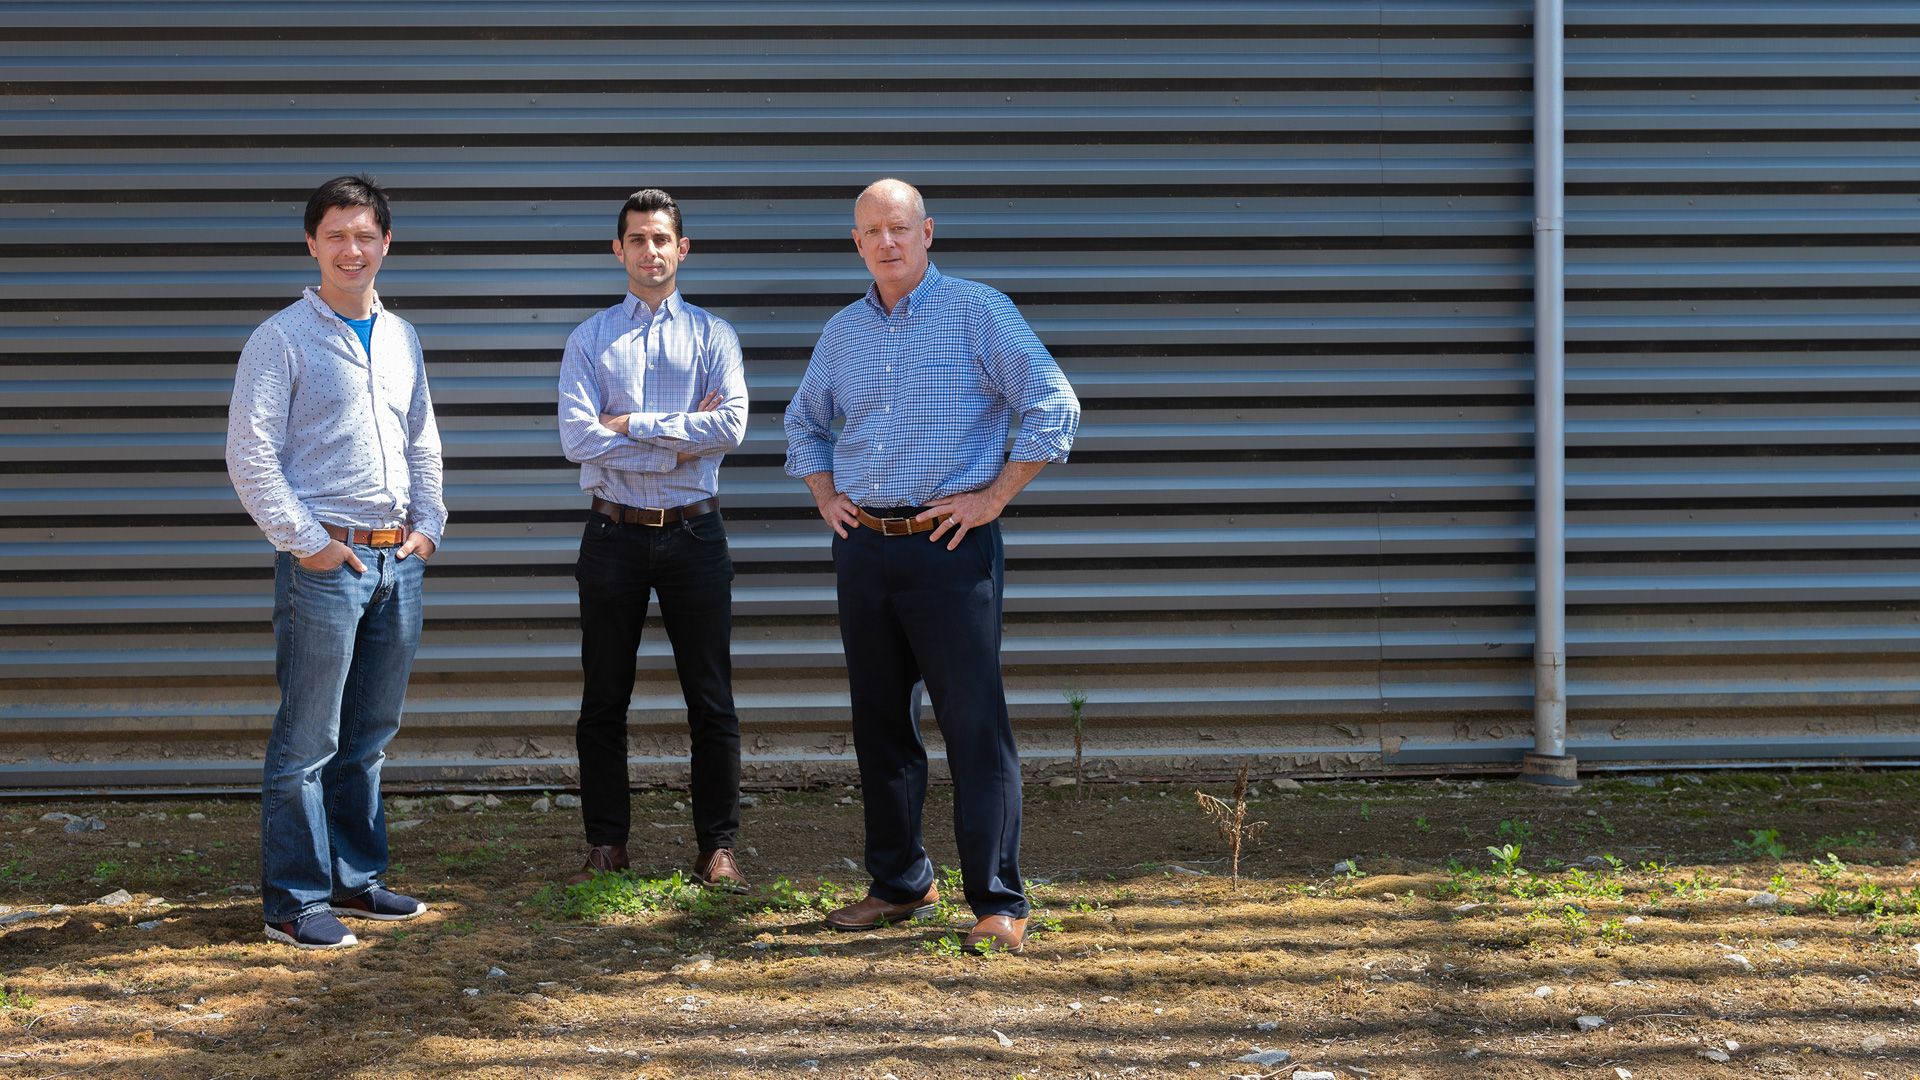 photo: three men standing in front of a corrugated metal building.